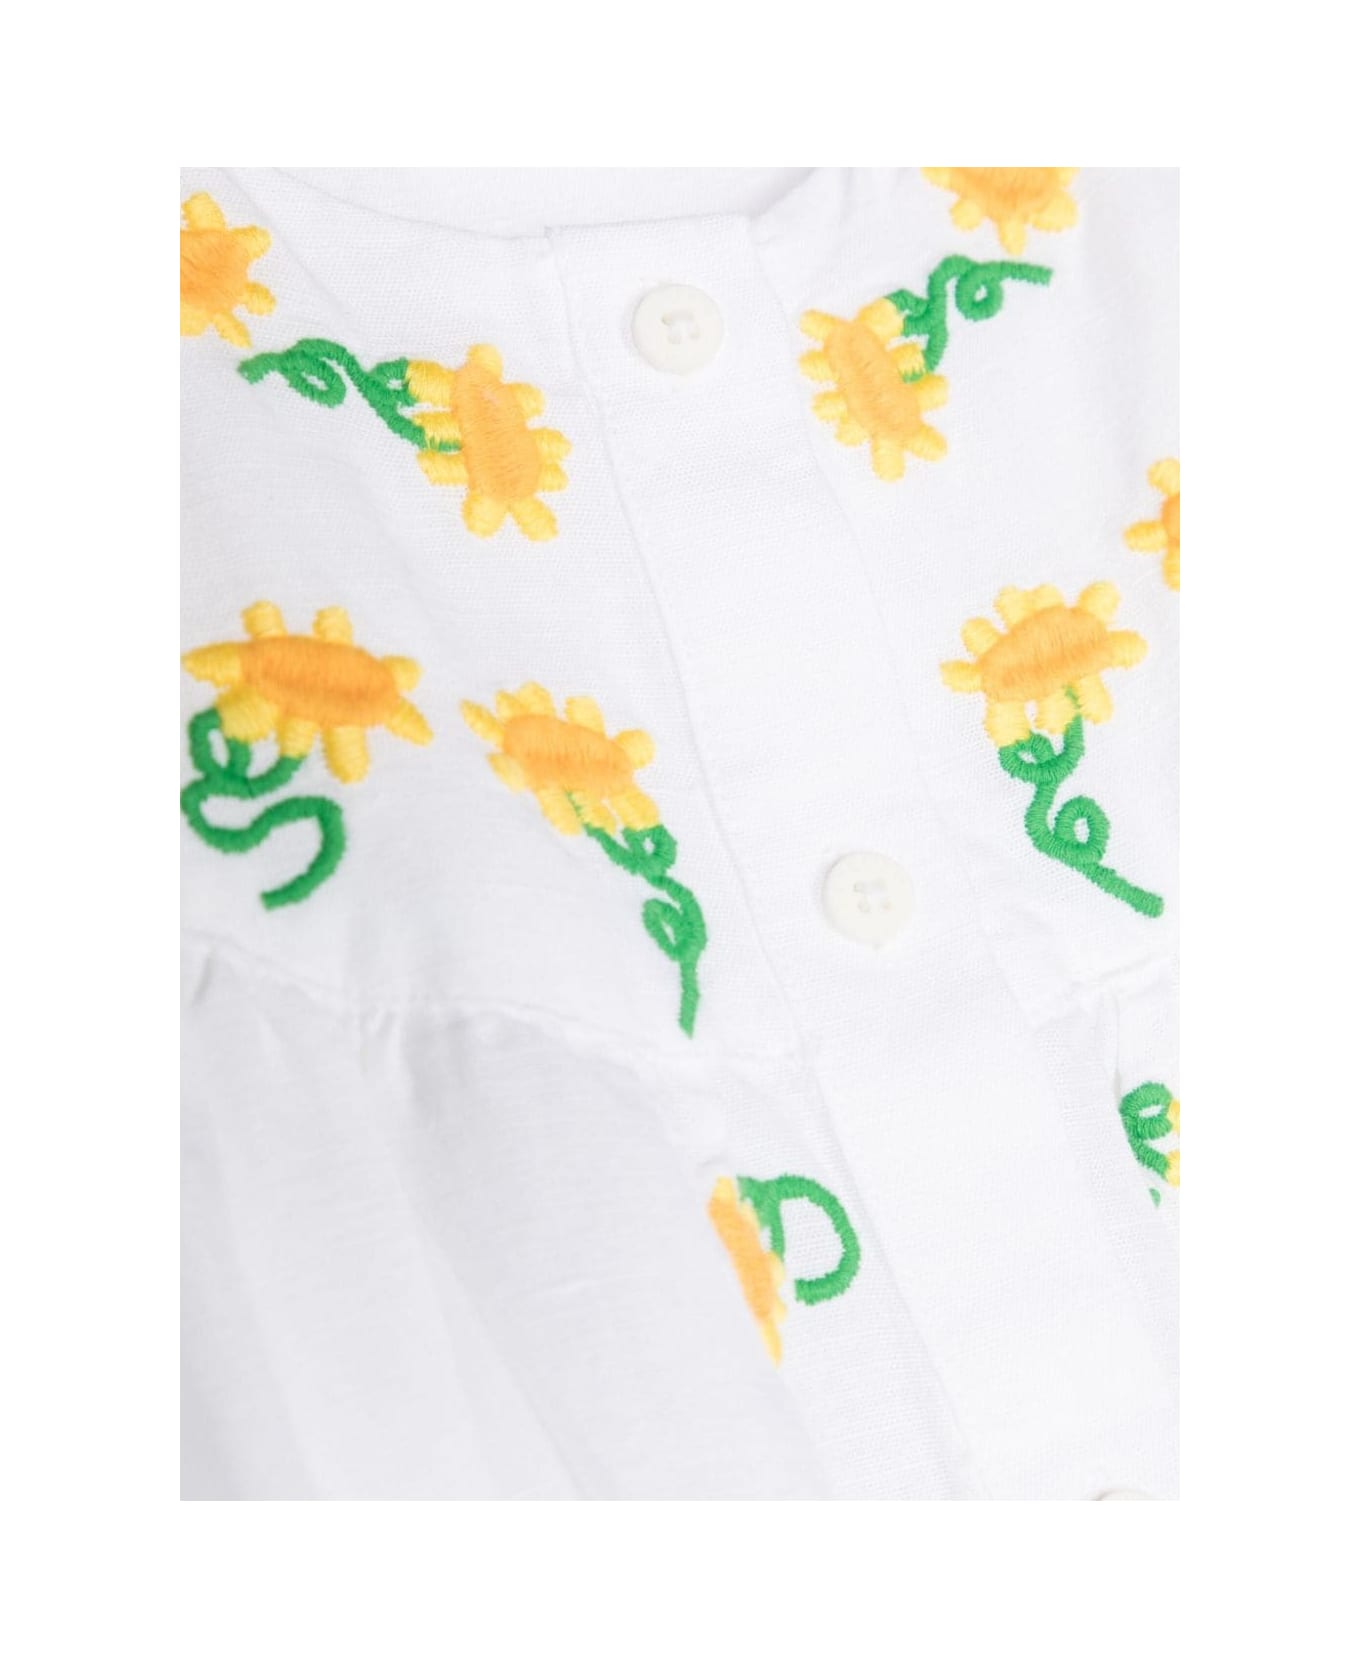 Stella McCartney Kids White Dress With Embroidered Sunflowers - White